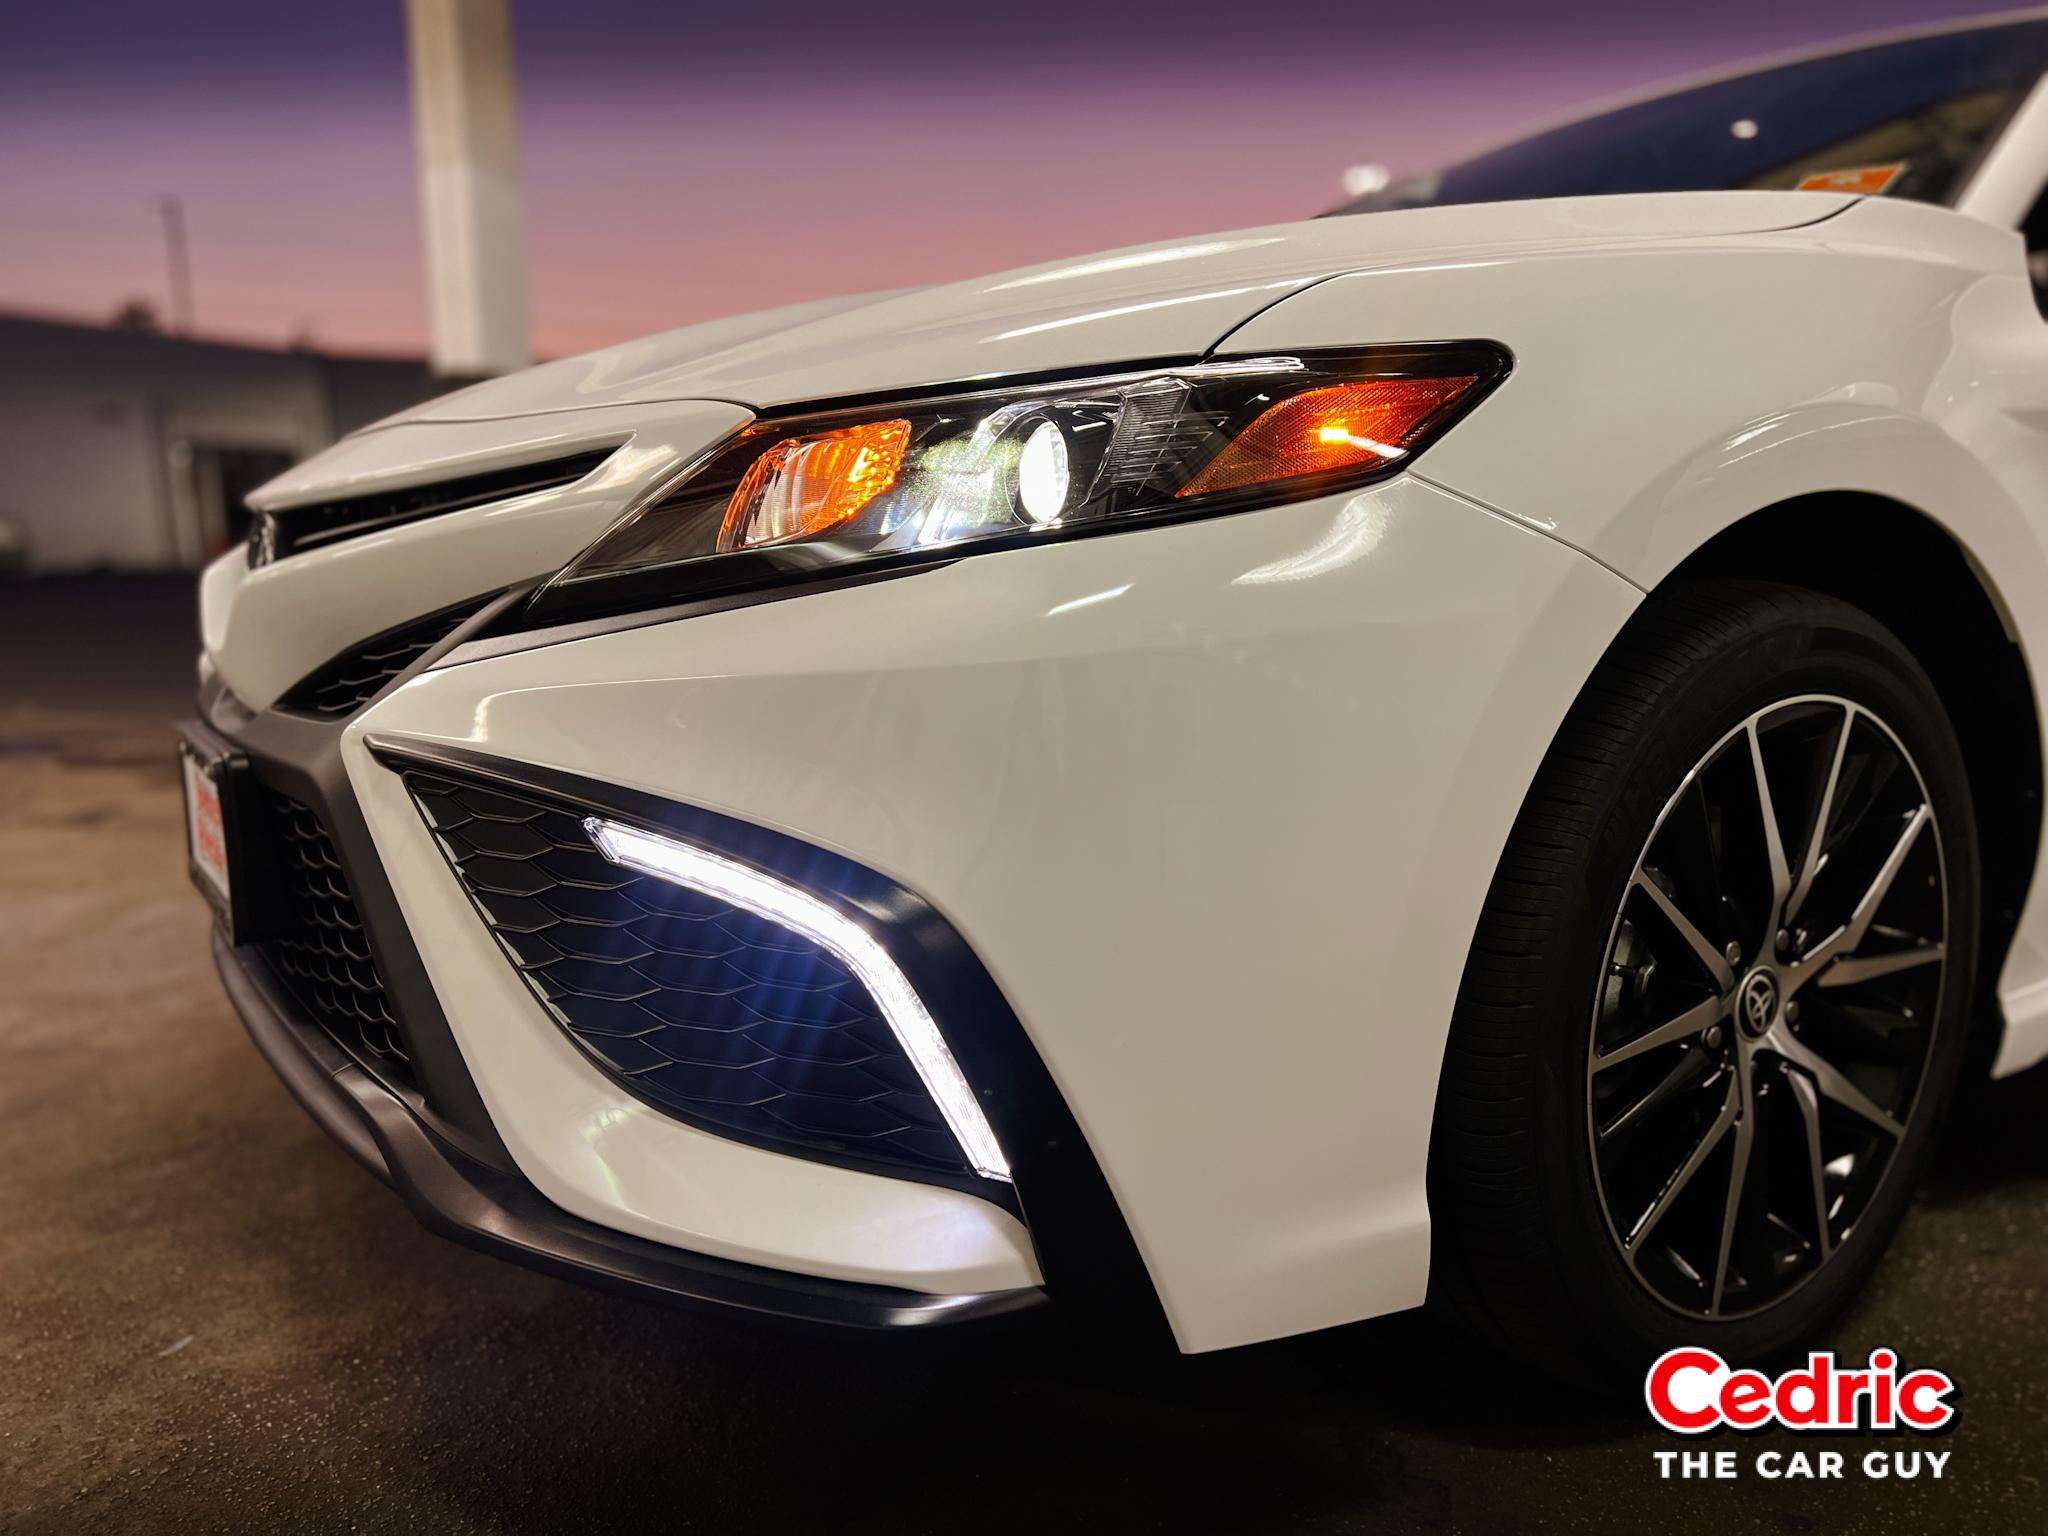 Automatic High Beams within the Projector Headlamps and LED Daytime Running Lights illuminated on the Toyota Camry SE